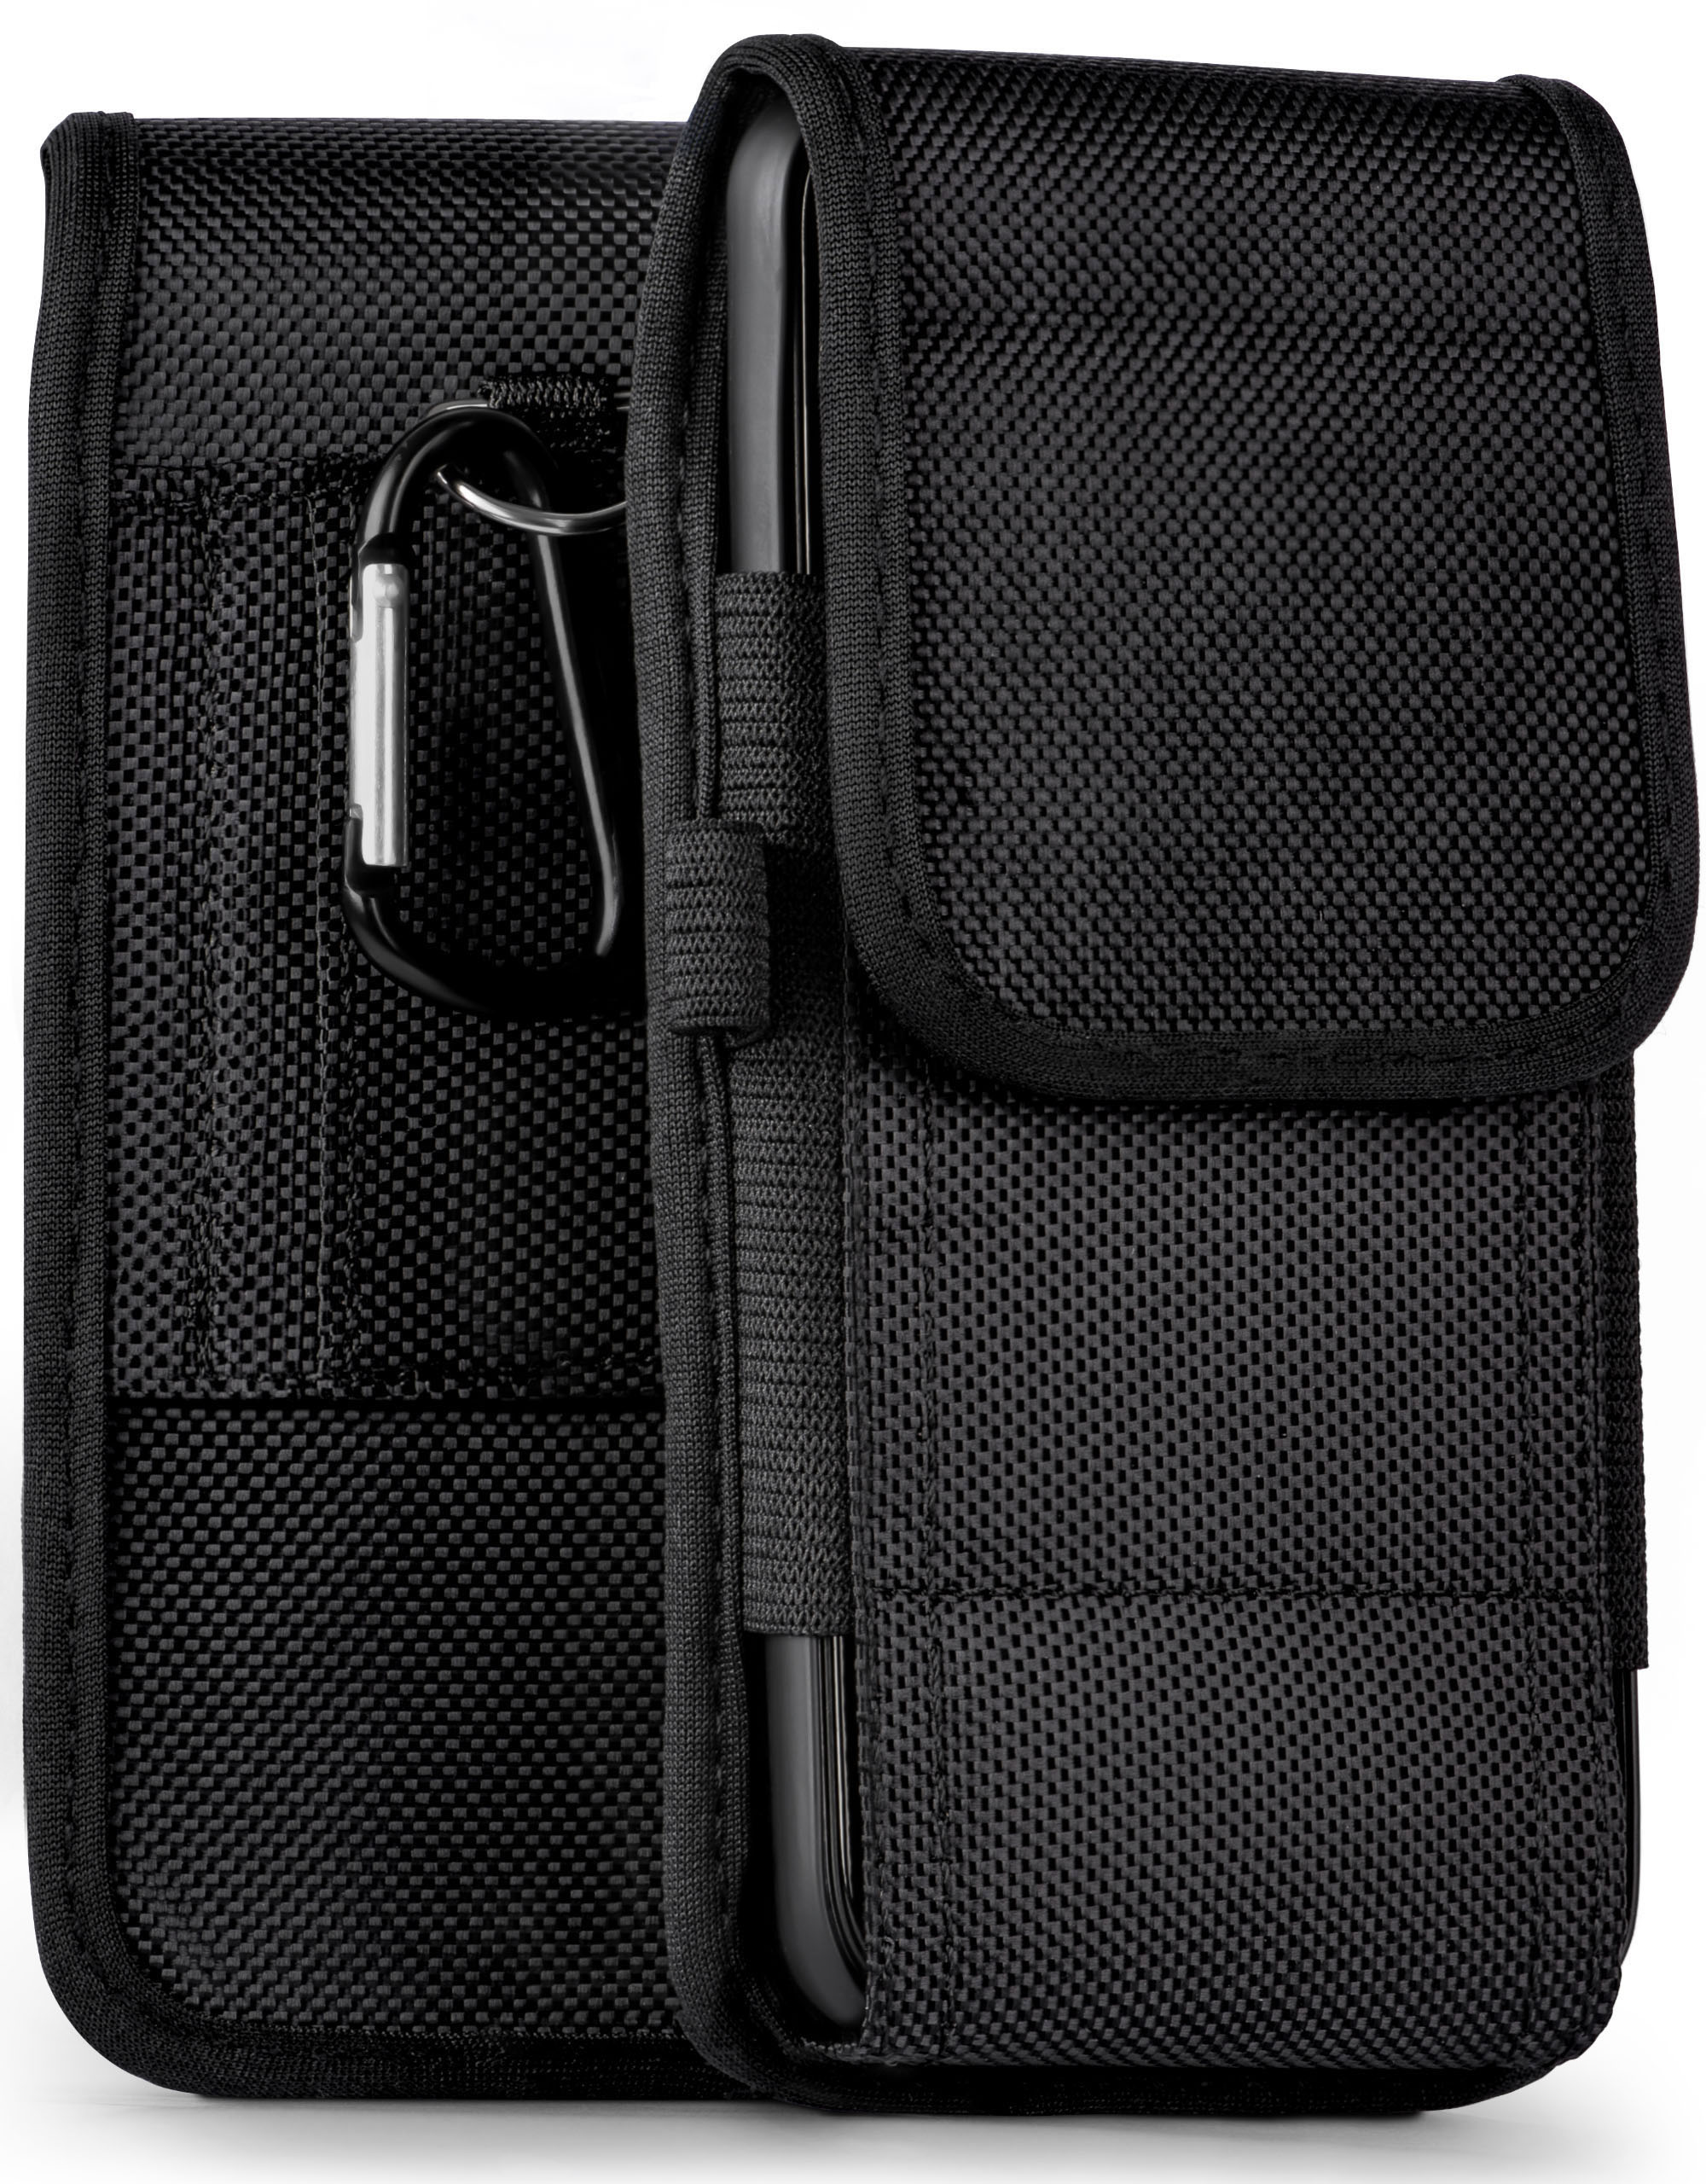 TP-Link, C7s, Agility Holster, Neffos Trail MOEX Case,